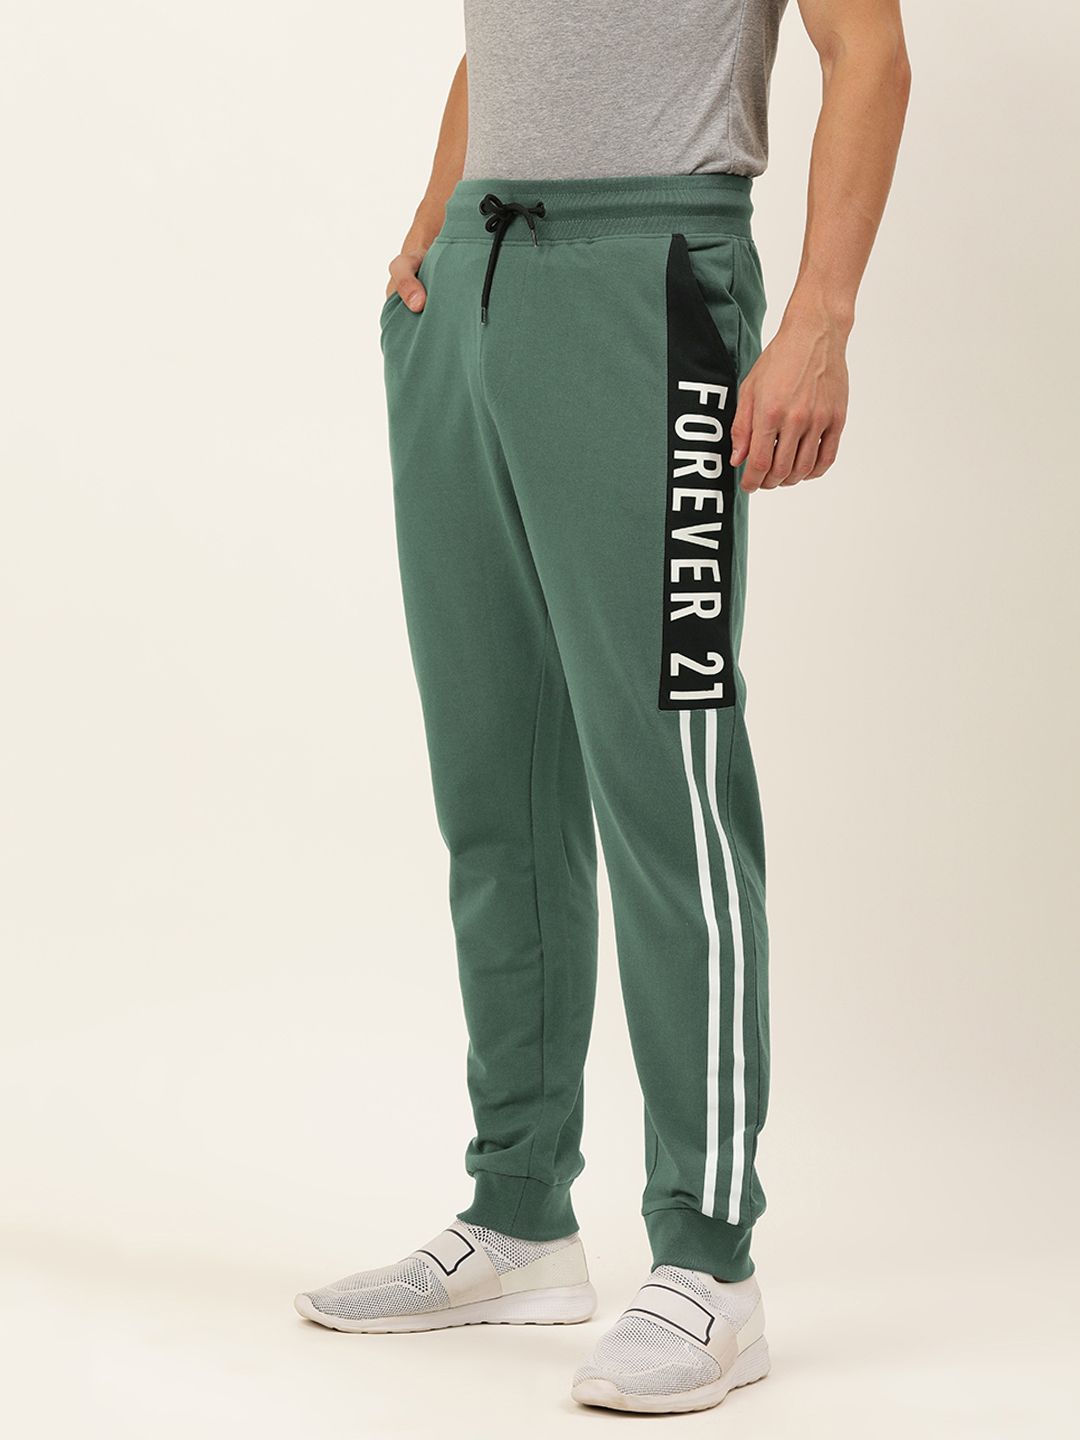 Multi Colour Comfortable Men Track Pants at Best Price in Saharanpur  Go  Fashion